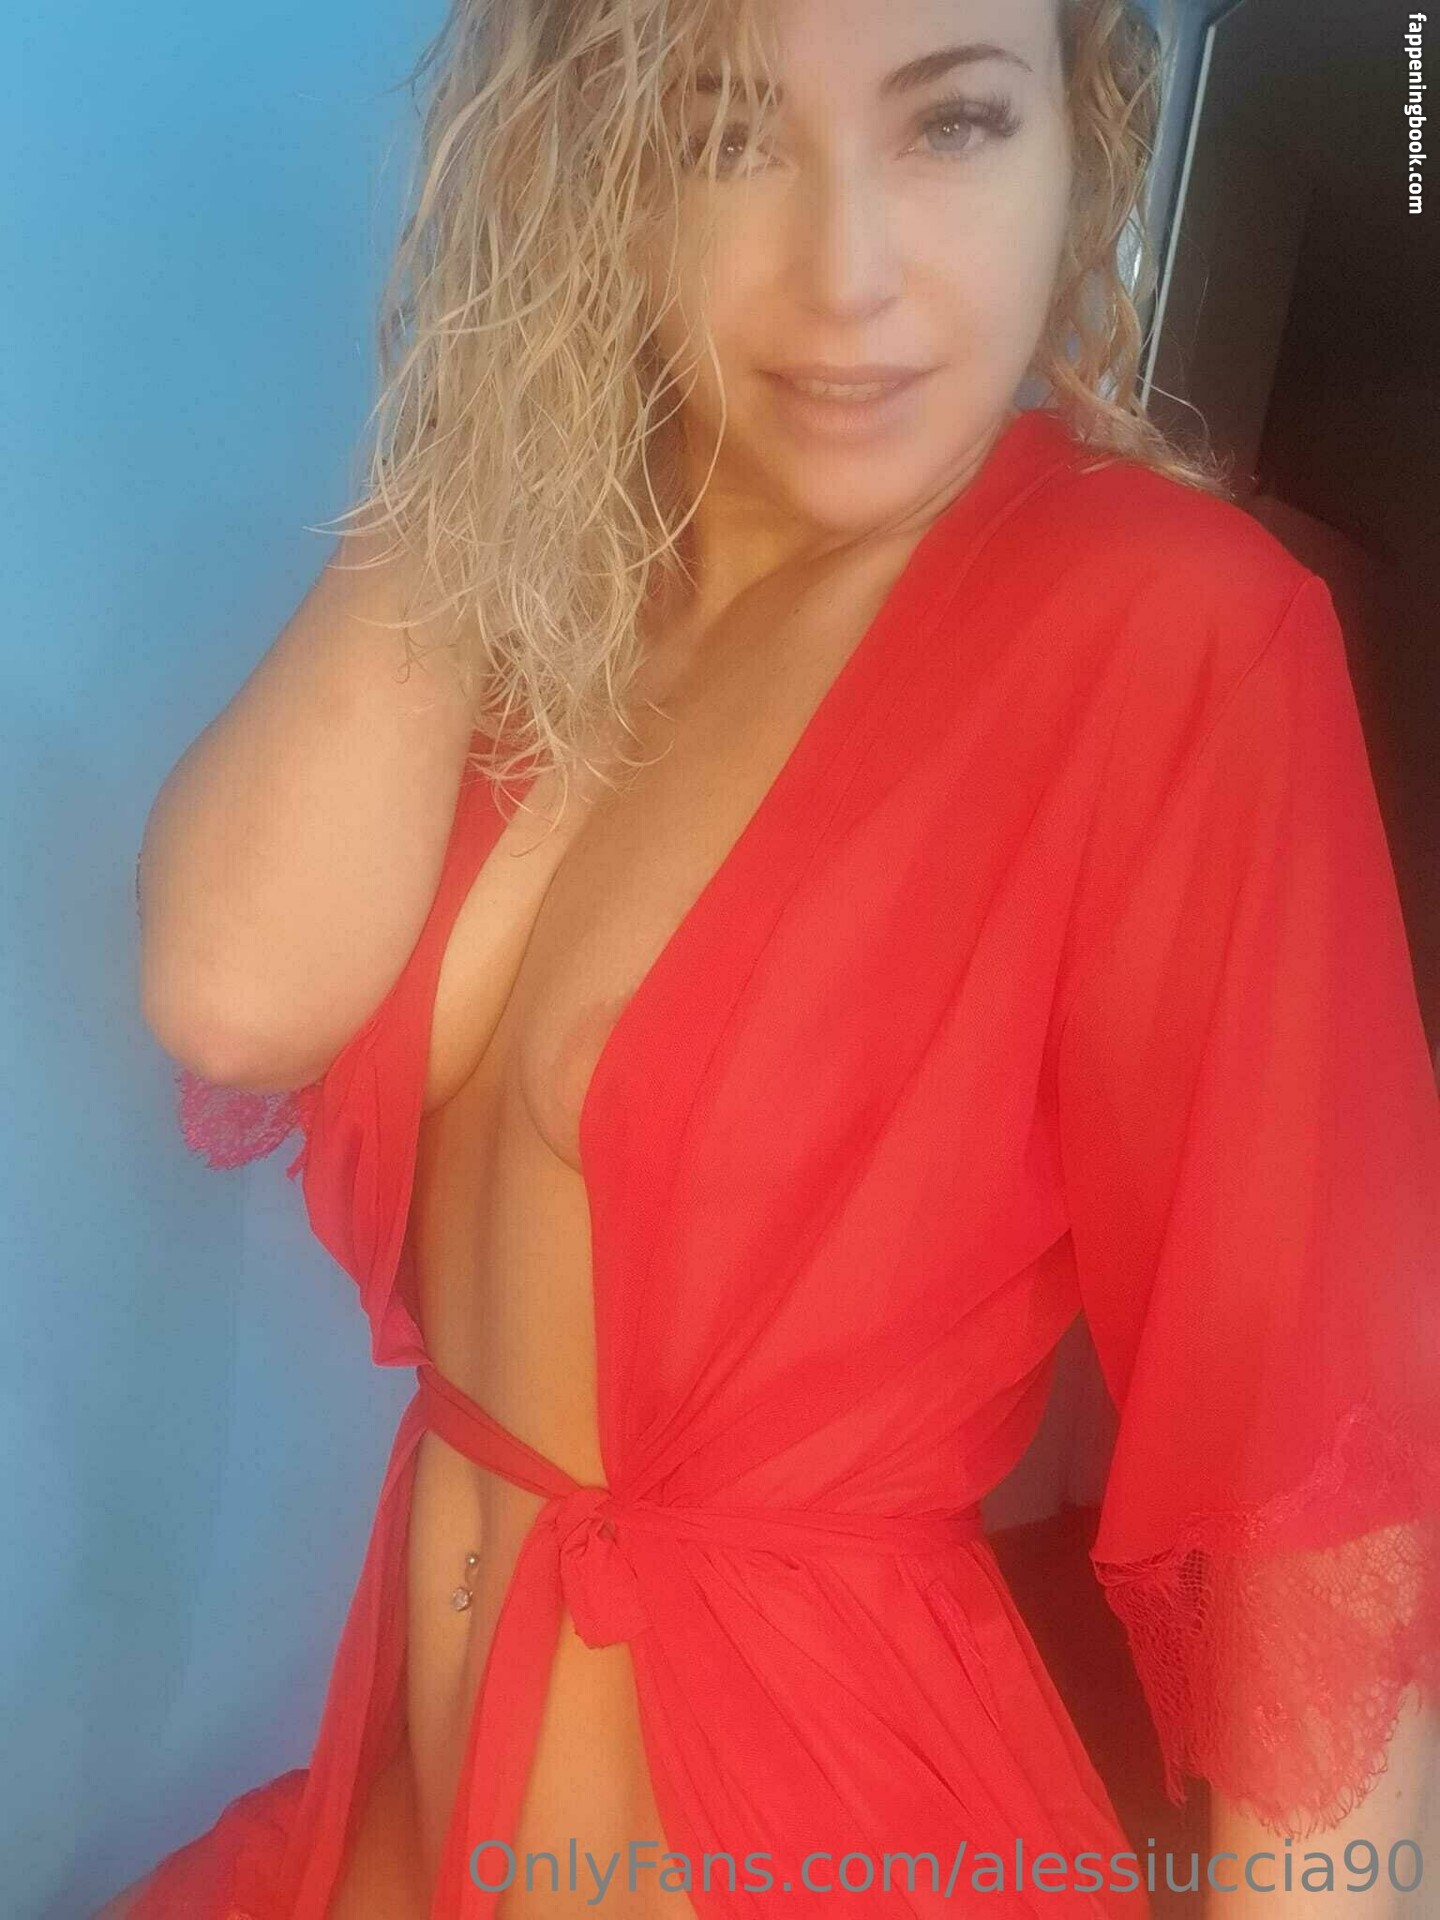 alessiuccia90 Nude OnlyFans Leaks